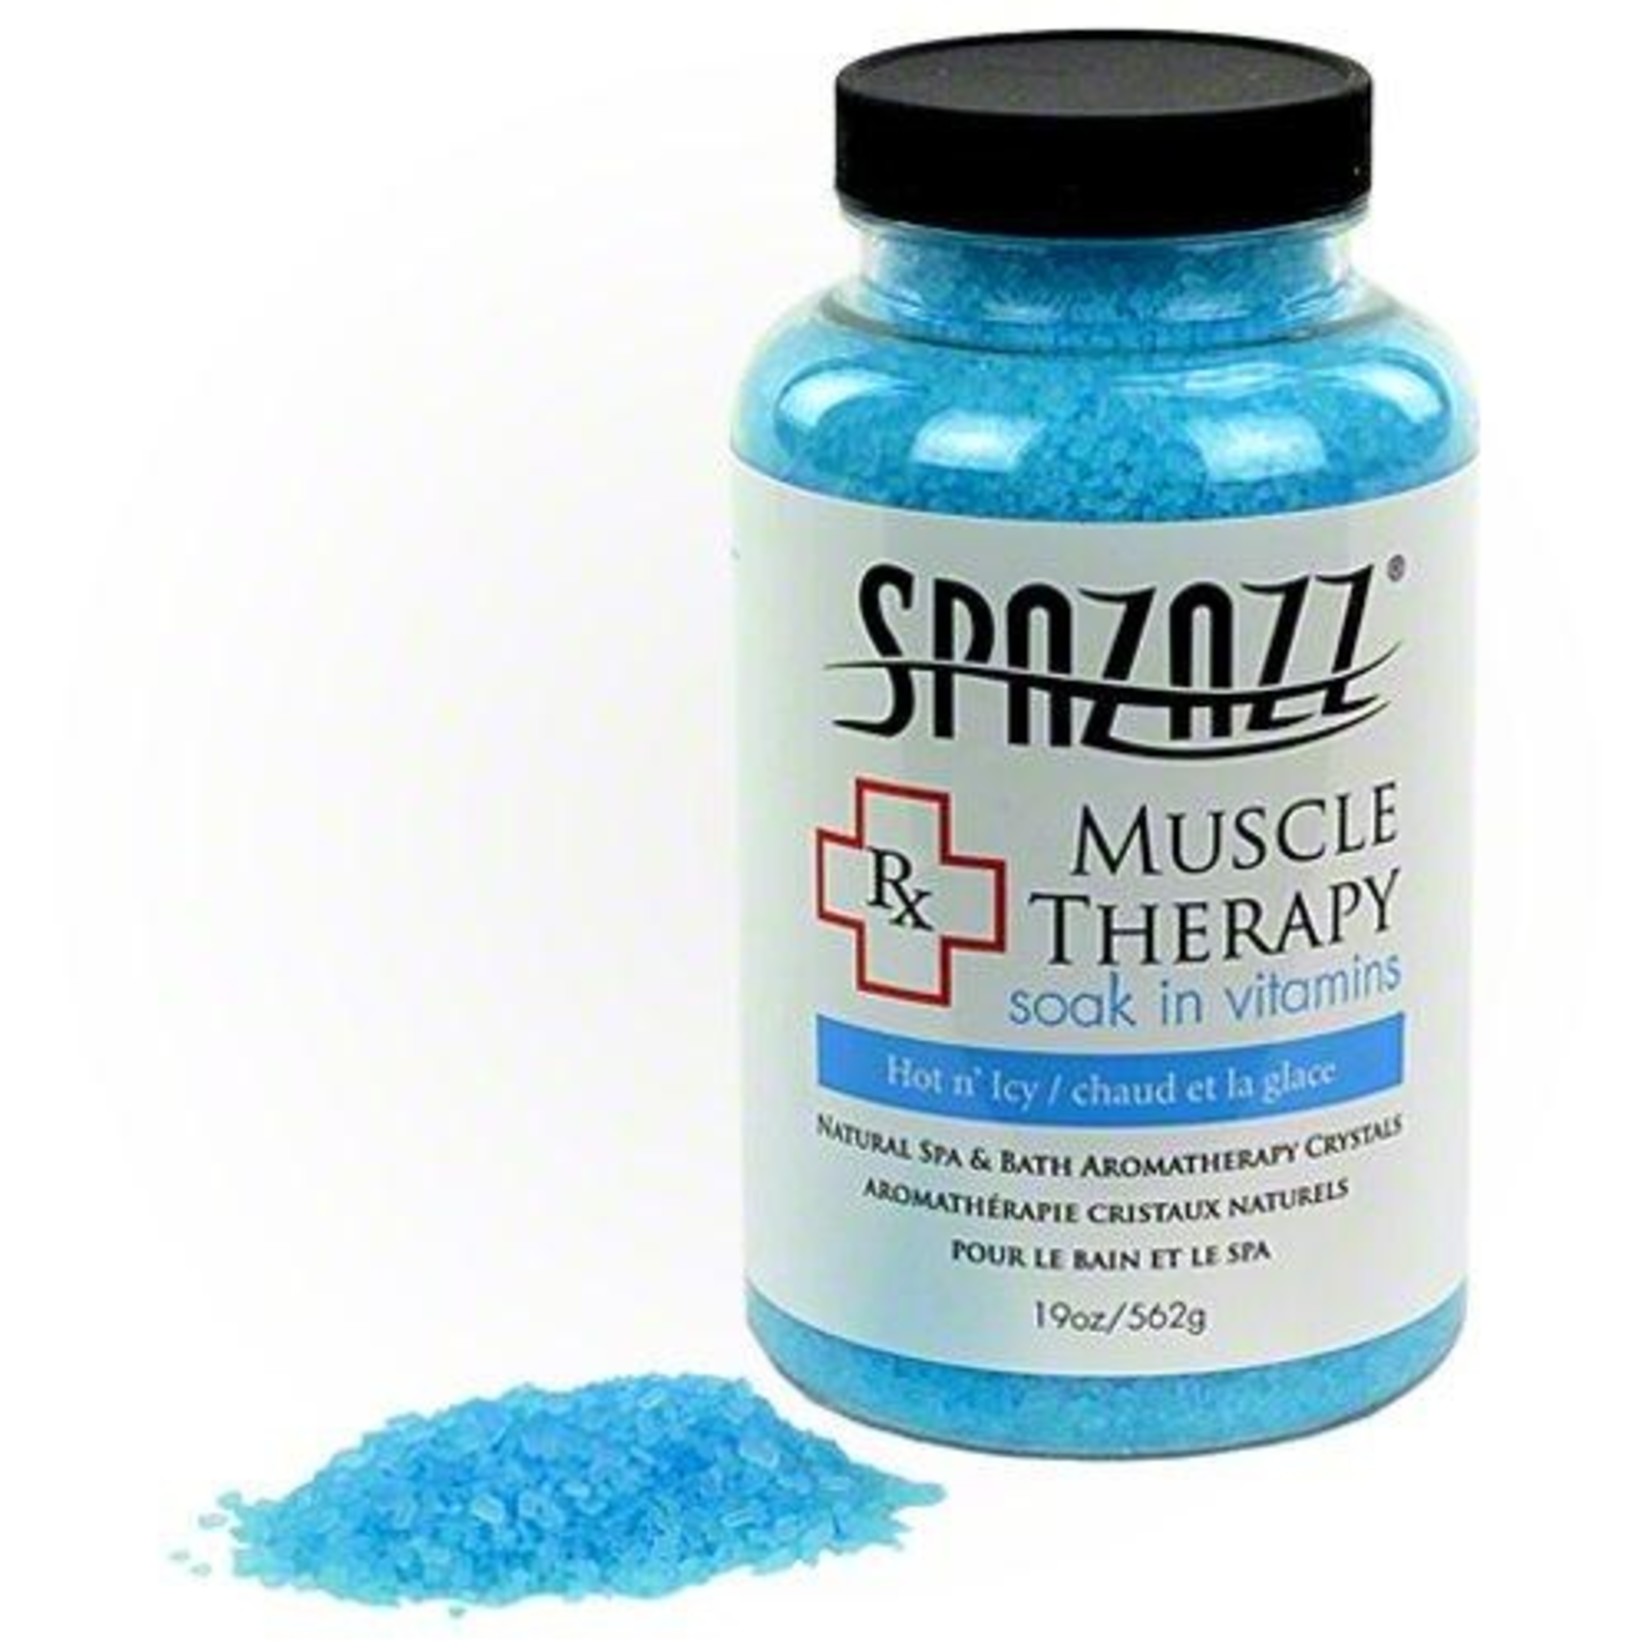 Spazazz Rx Therapy Crystals - Muscle Therapy (562 g)